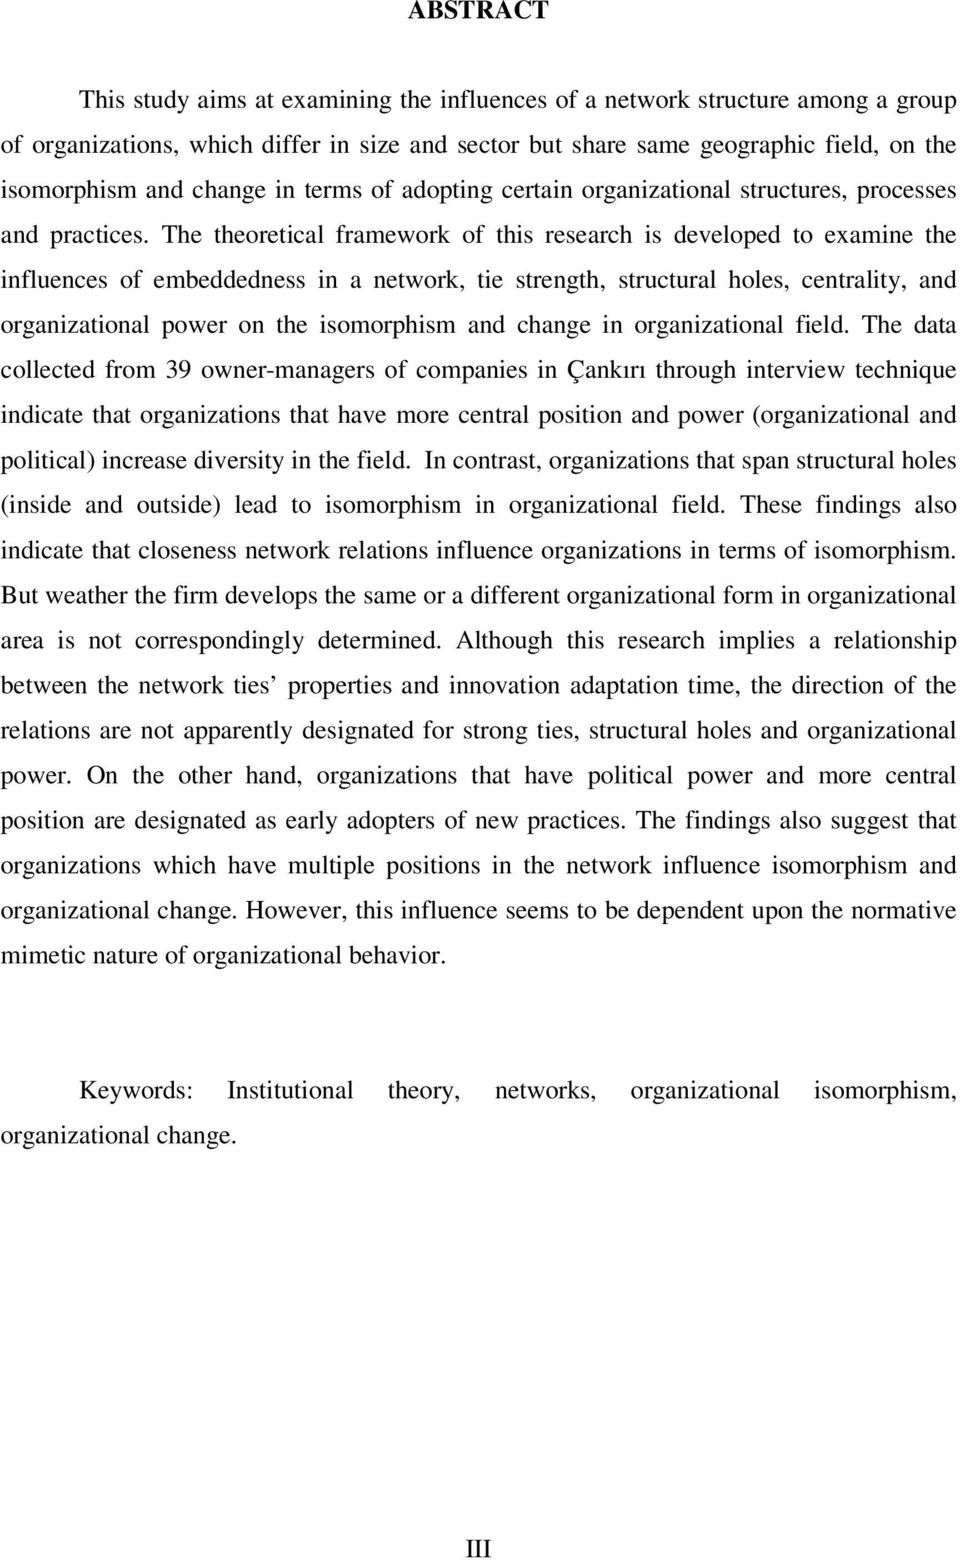 The theoretical framework of this research is developed to examine the influences of embeddedness in a network, tie strength, structural holes, centrality, and organizational power on the isomorphism